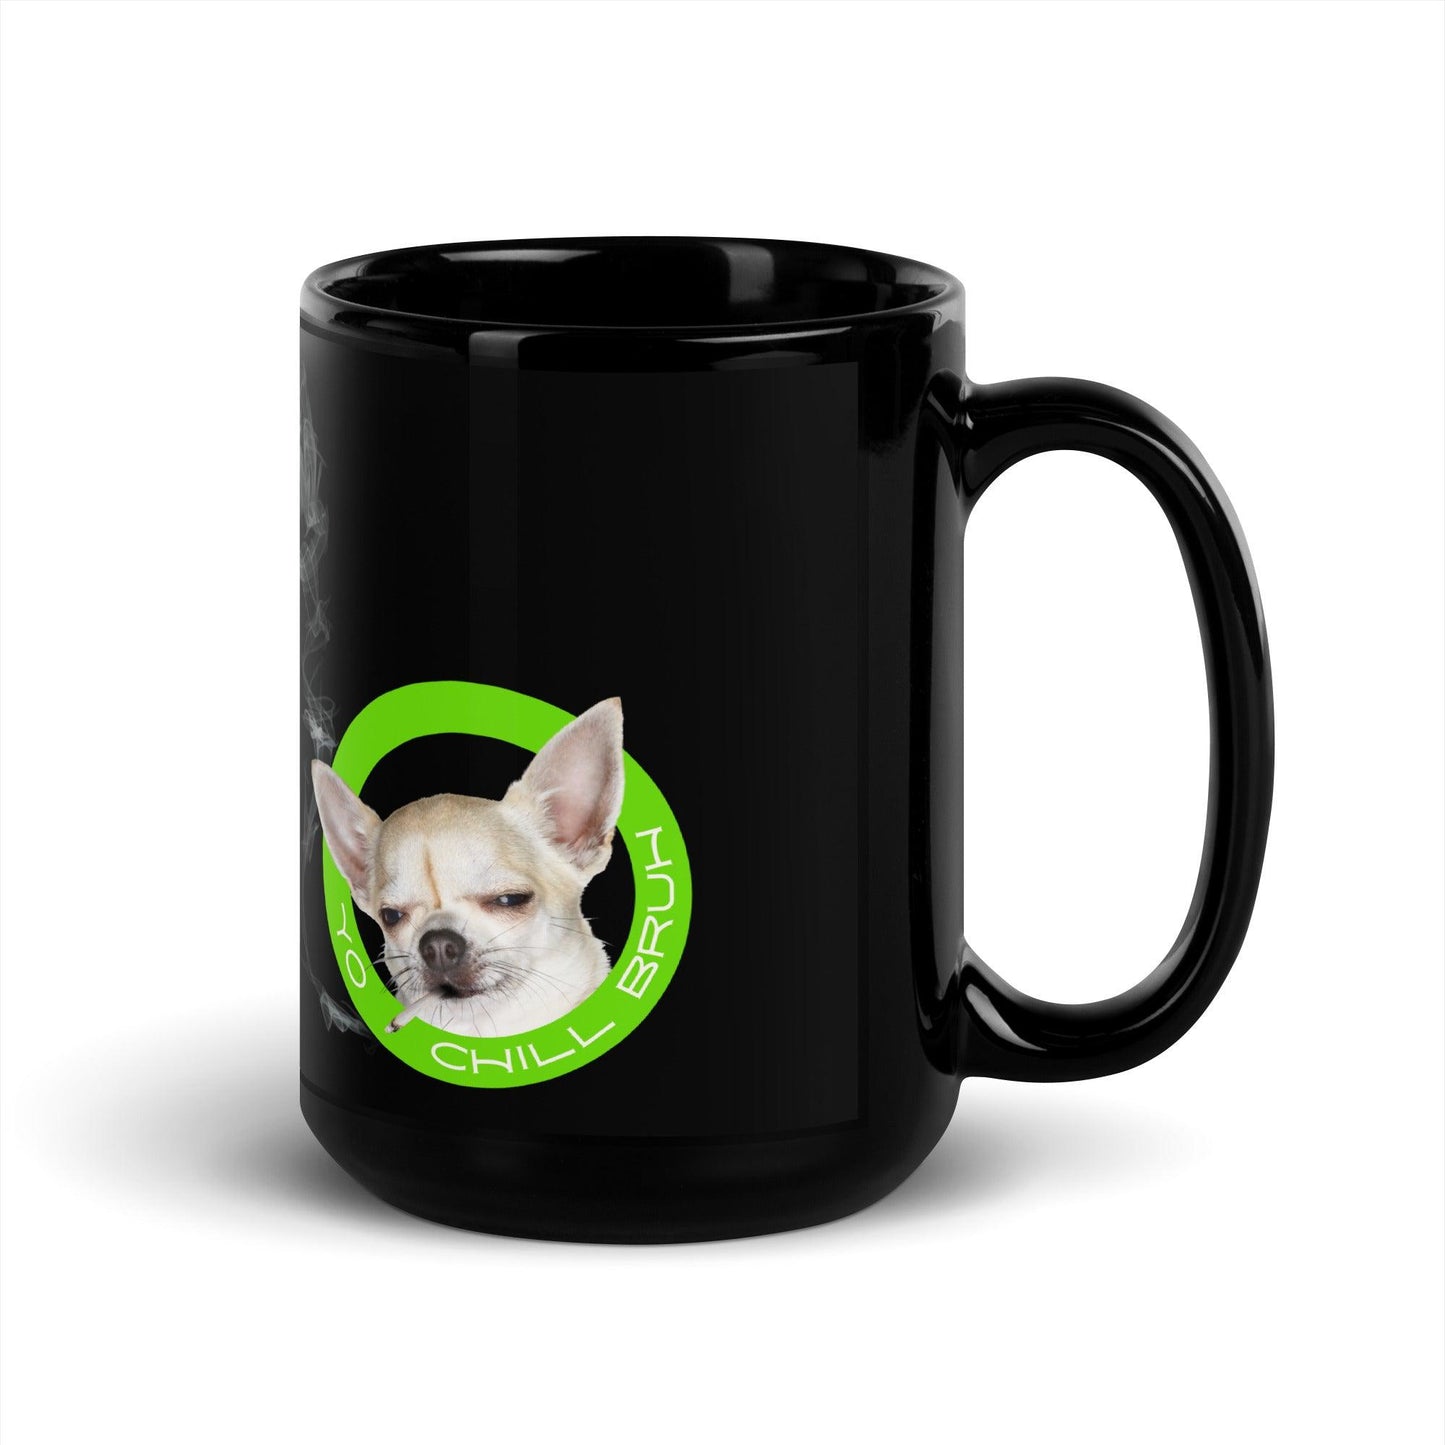 Be more chill chihuahua and relax with a cuppa. This glossy black mug features an artist's collage of a very chilled chi almost falling asleep with a smoking hand-rolled cigarette in his mouth, and the simple message: Yo chill bruh. A la Jessie in Breaking Bad. It's the coolest chihuahua meme you will find anywhere!